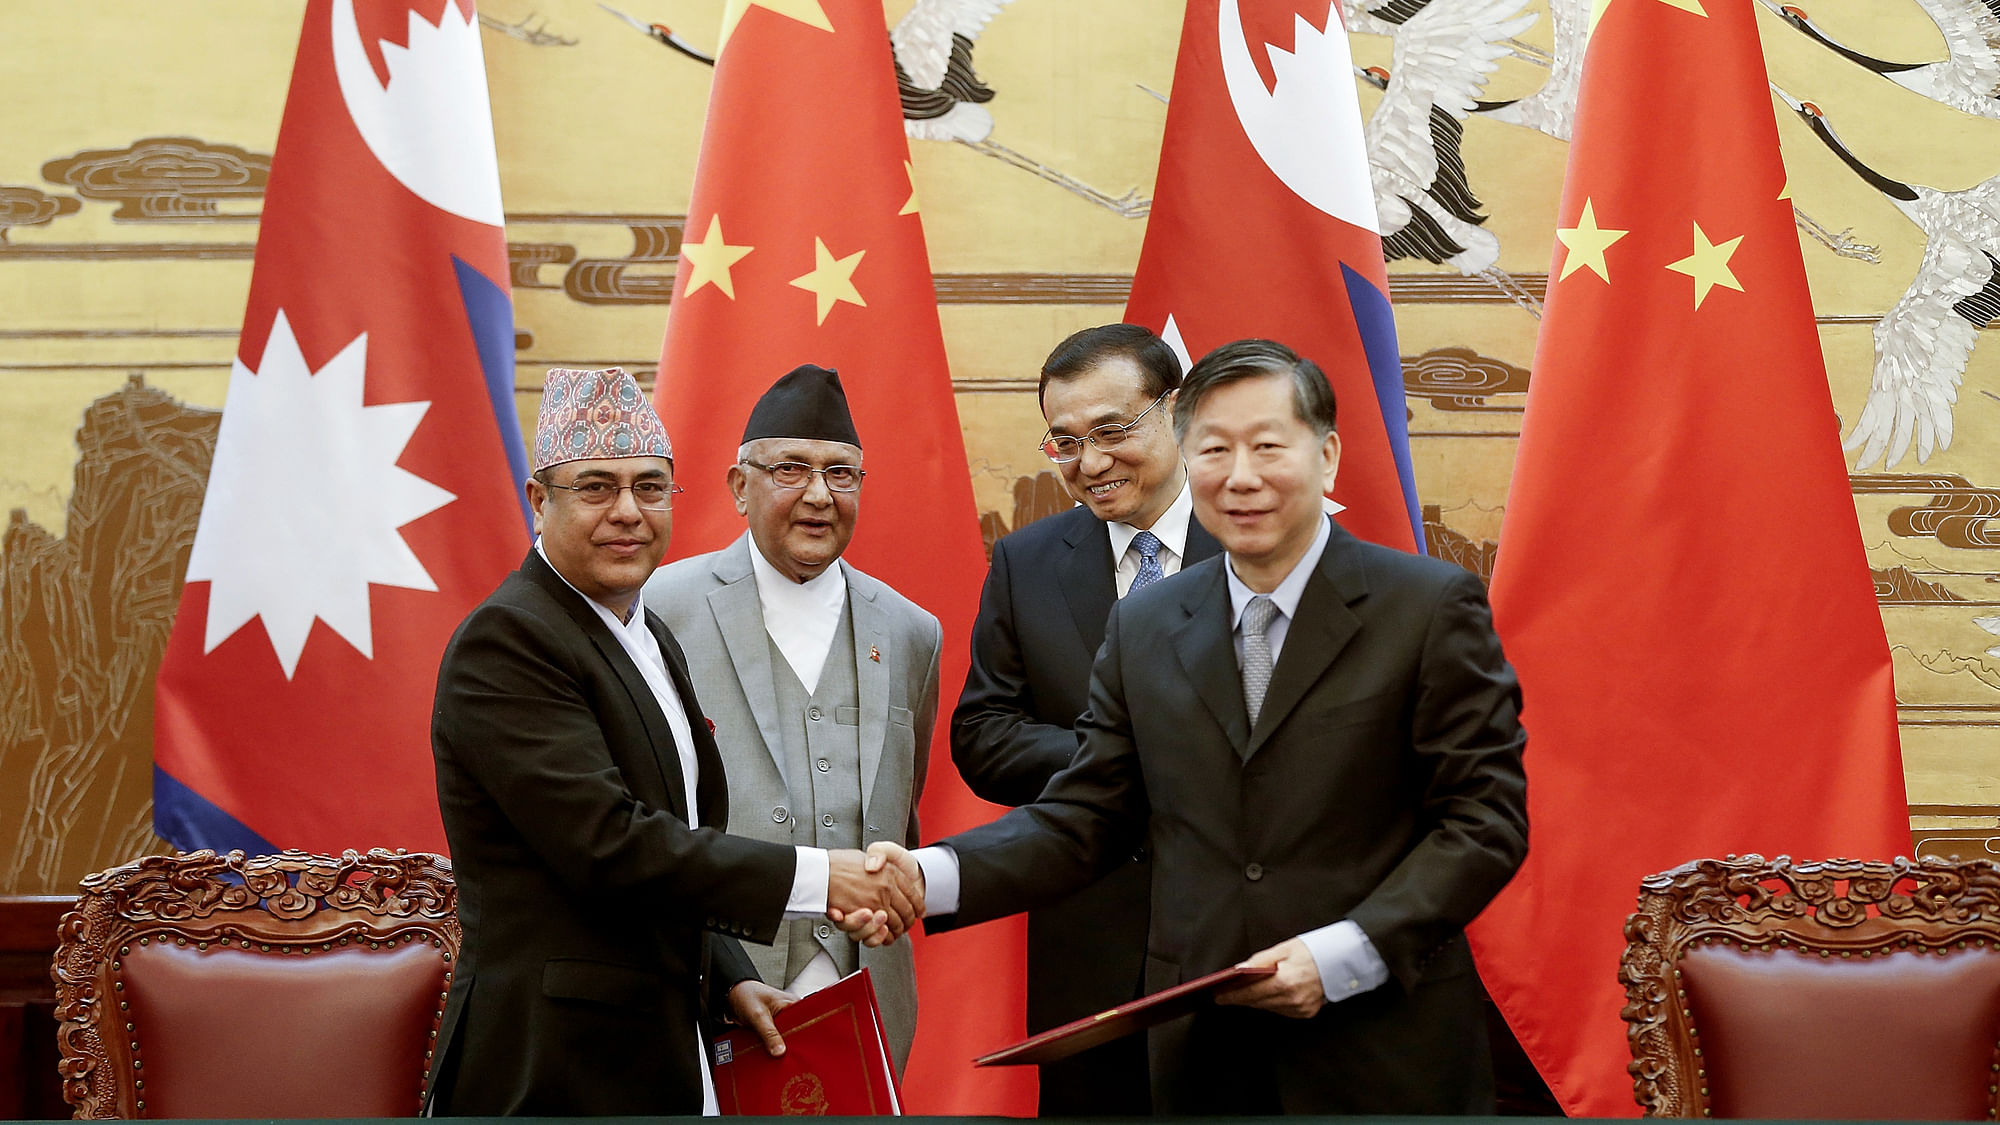 Chinese Premier Li Keqiang, rear right, with Nepal’s Prime Minister Khadga Prasad Oli, rear left, attend a signing ceremony at the Great Hall of the People on Monday, 21 March 2016 in Beijing, China.